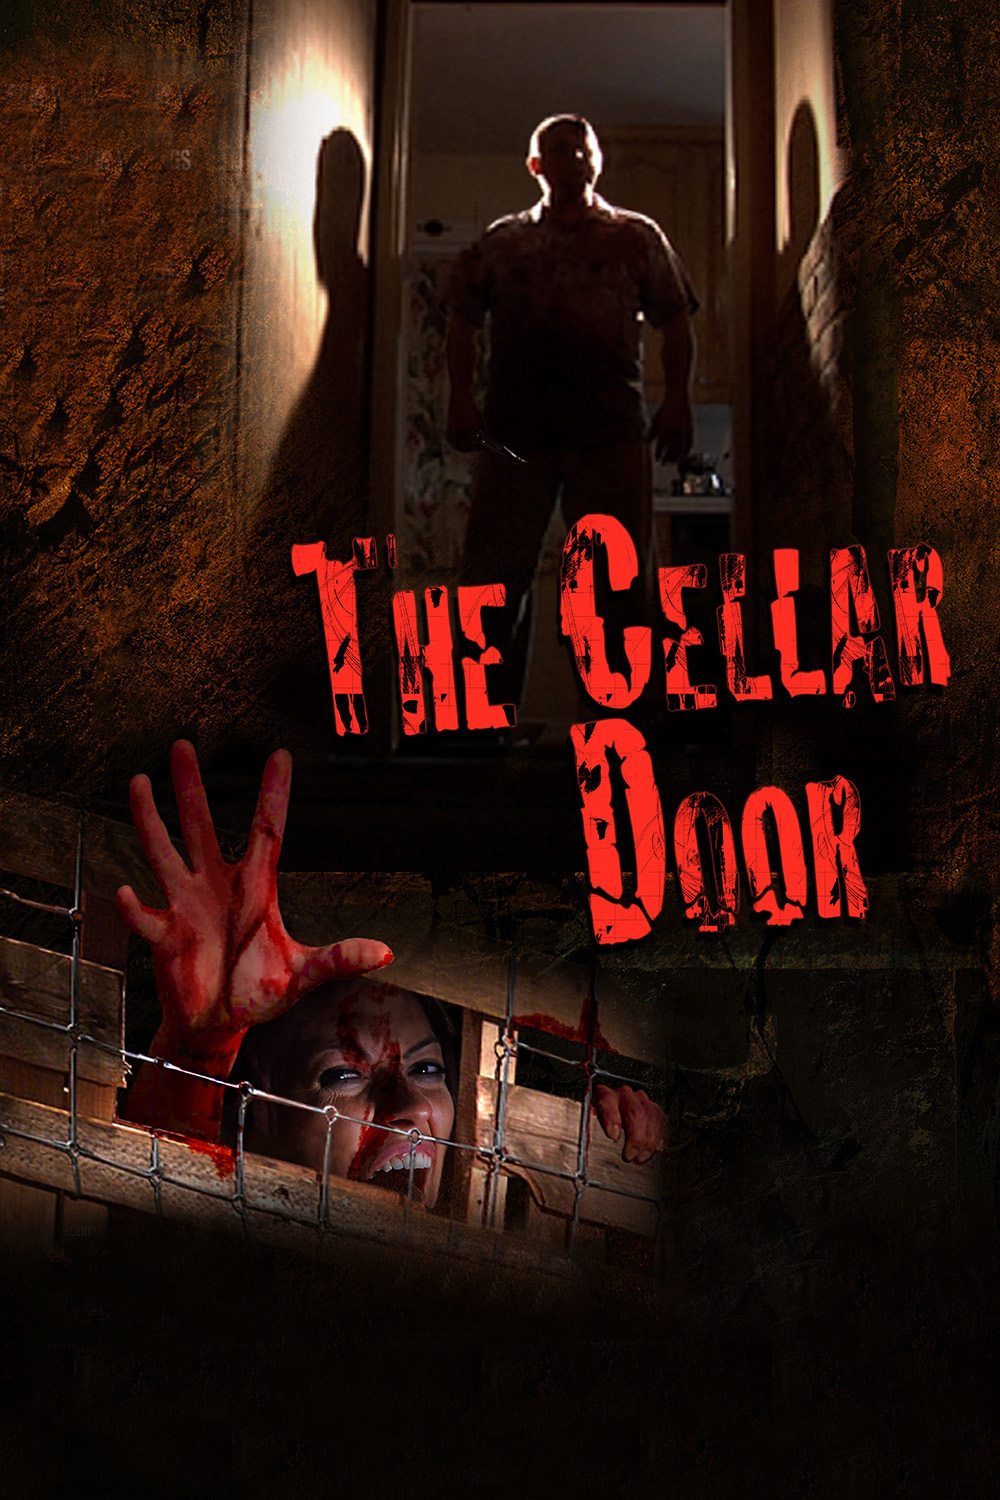 Poster for the movie "The Cellar Door"